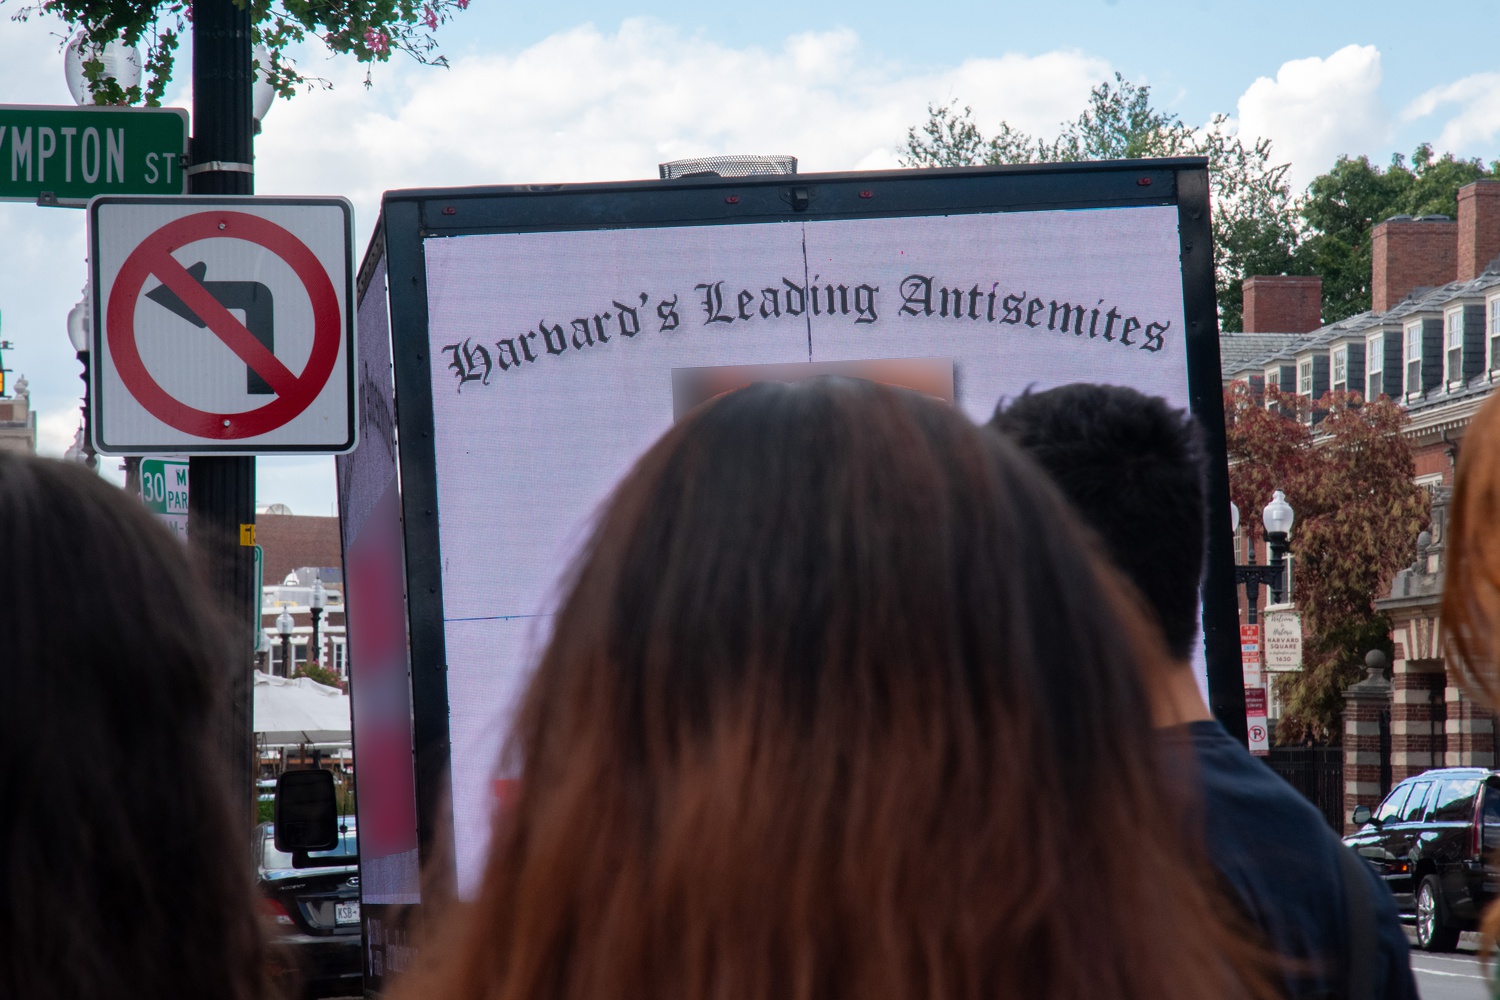 Passers-by observe the billboard truck displaying students’ faces and names Thursday. The Crimson blurred parts of this photograph to avoid identifying students due to retaliation concerns.